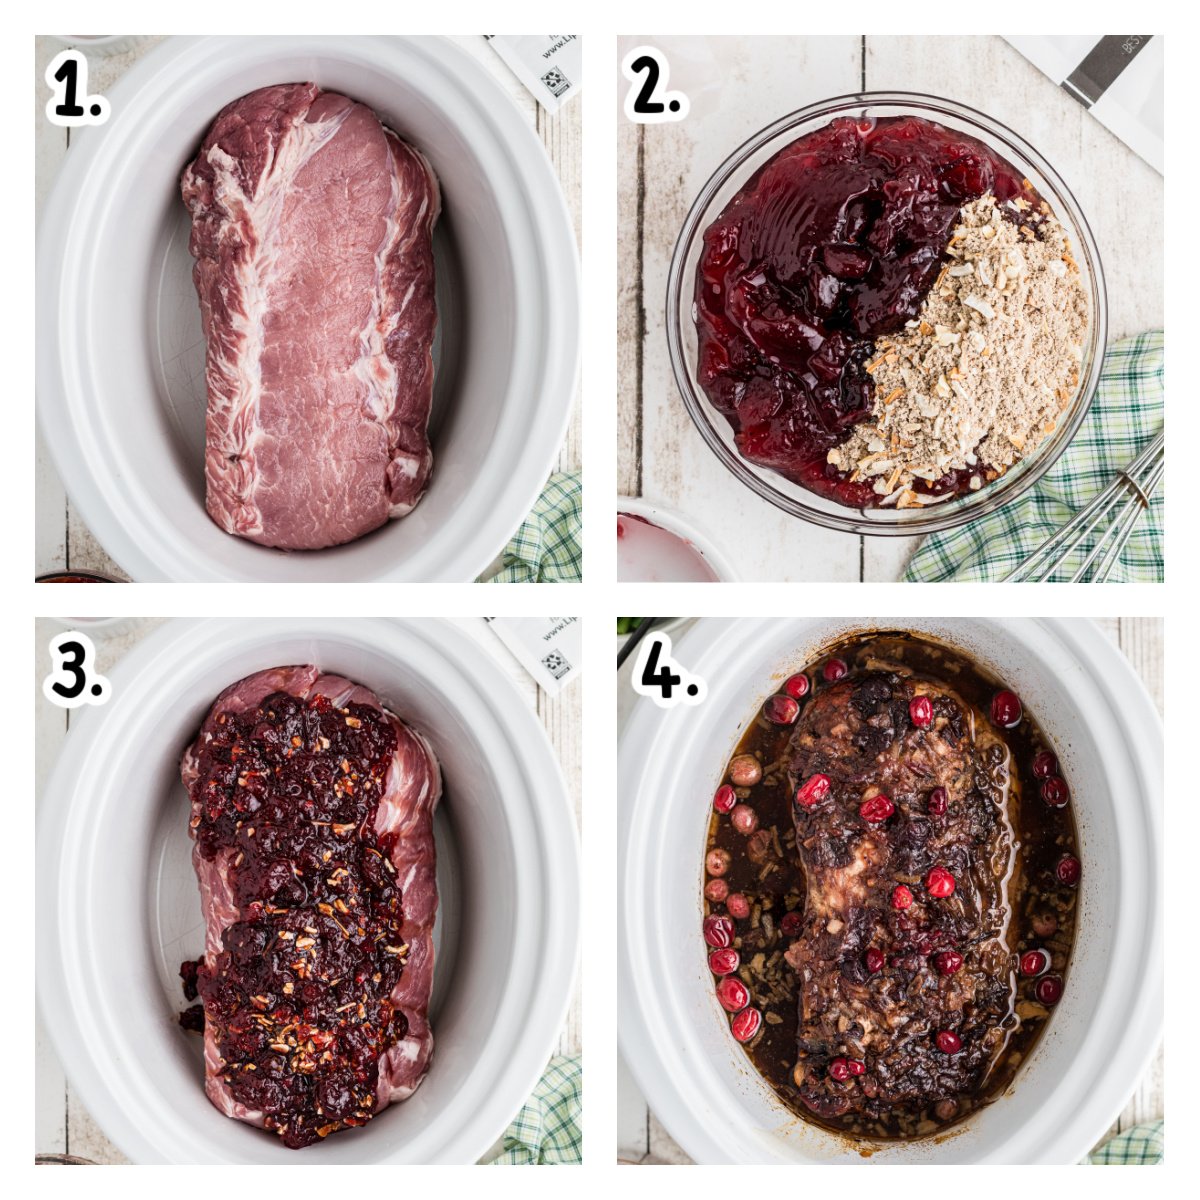 Four images showing how to make cranberry pork loin in a slow cooker.